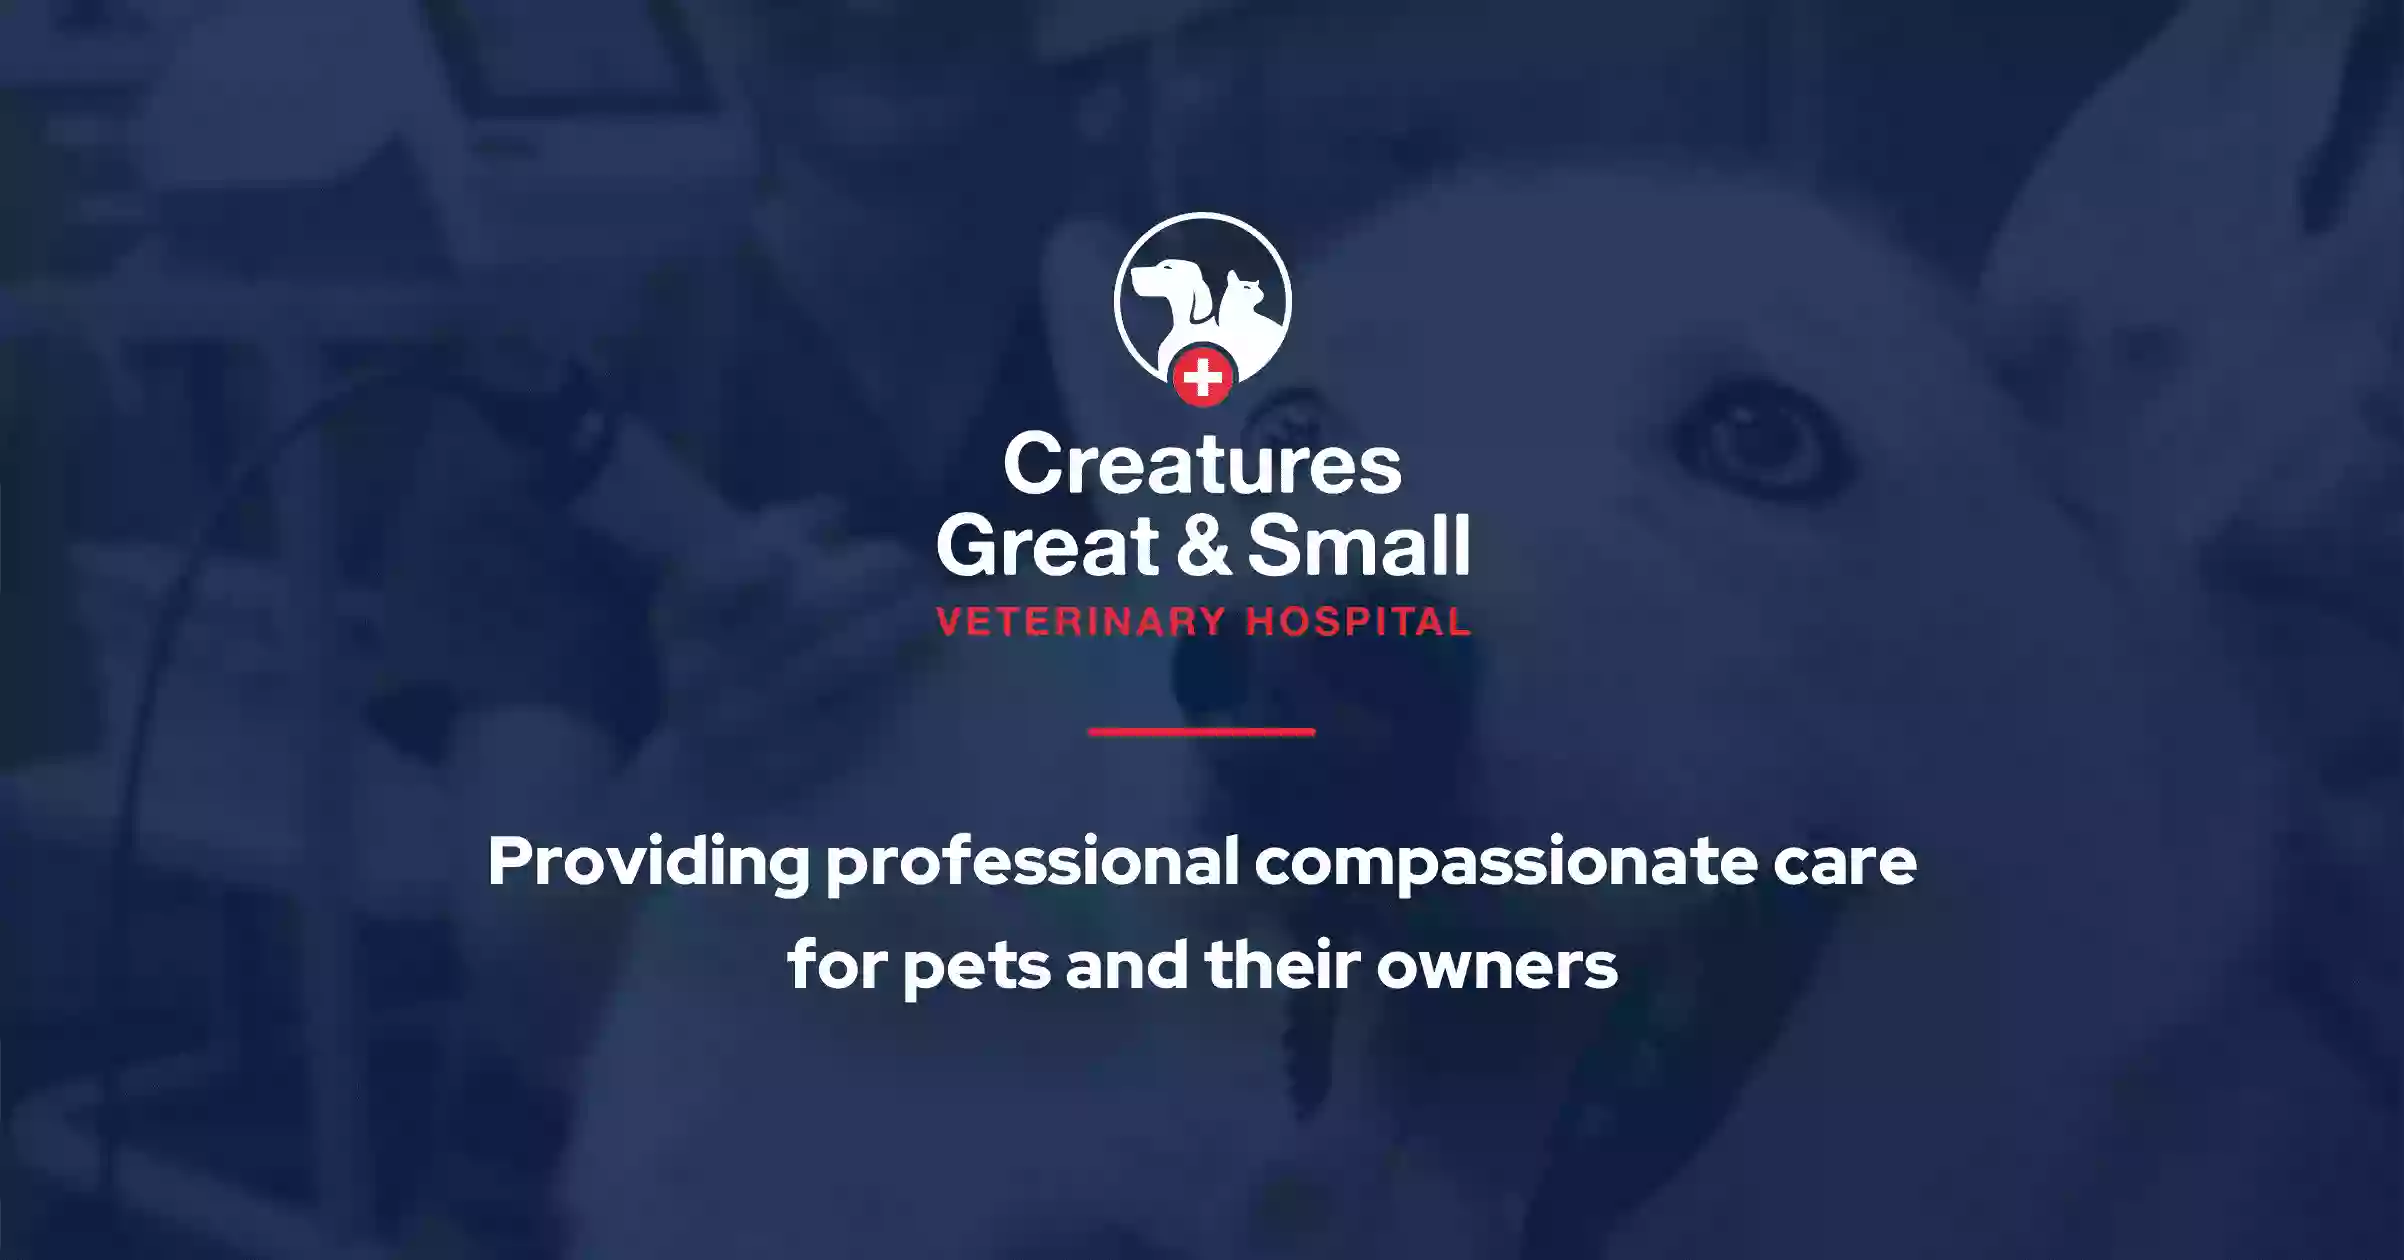 Creatures Great & Small Veterinary